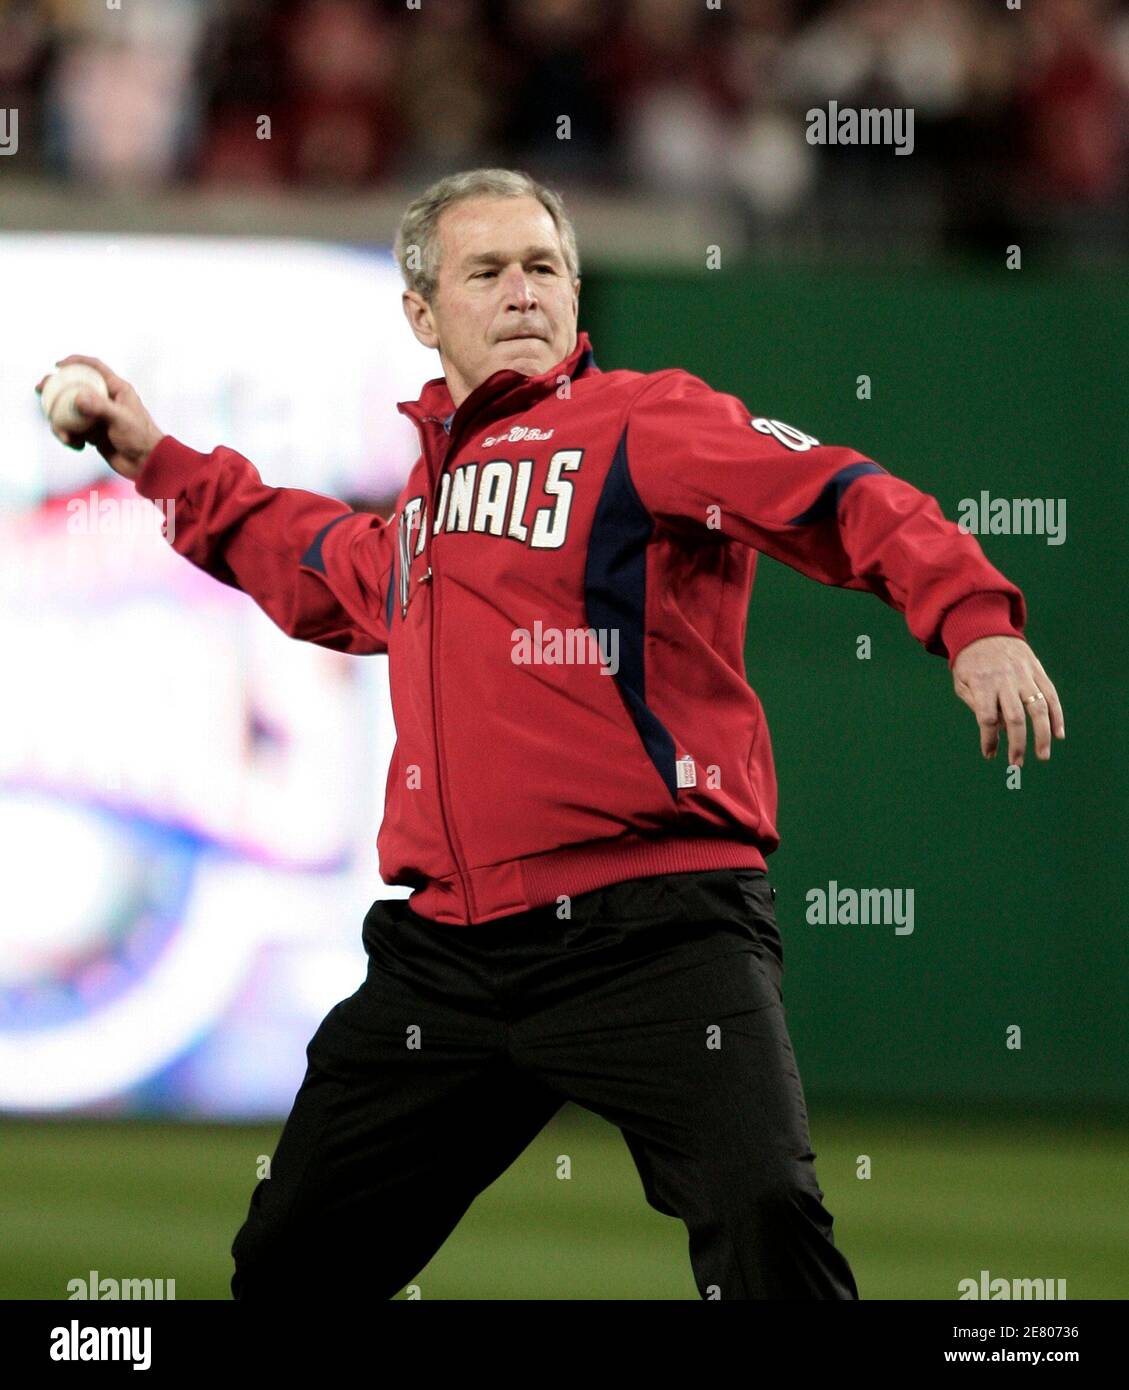 President George W. Bush throws out the first ball at the new Nationals Park before the MLB baseball game between the Washington Nationals and Atlanta Braves in Washington March 30, 2008.     REUTERS/Gary Cameron   (UNITED STATES) Stock Photo